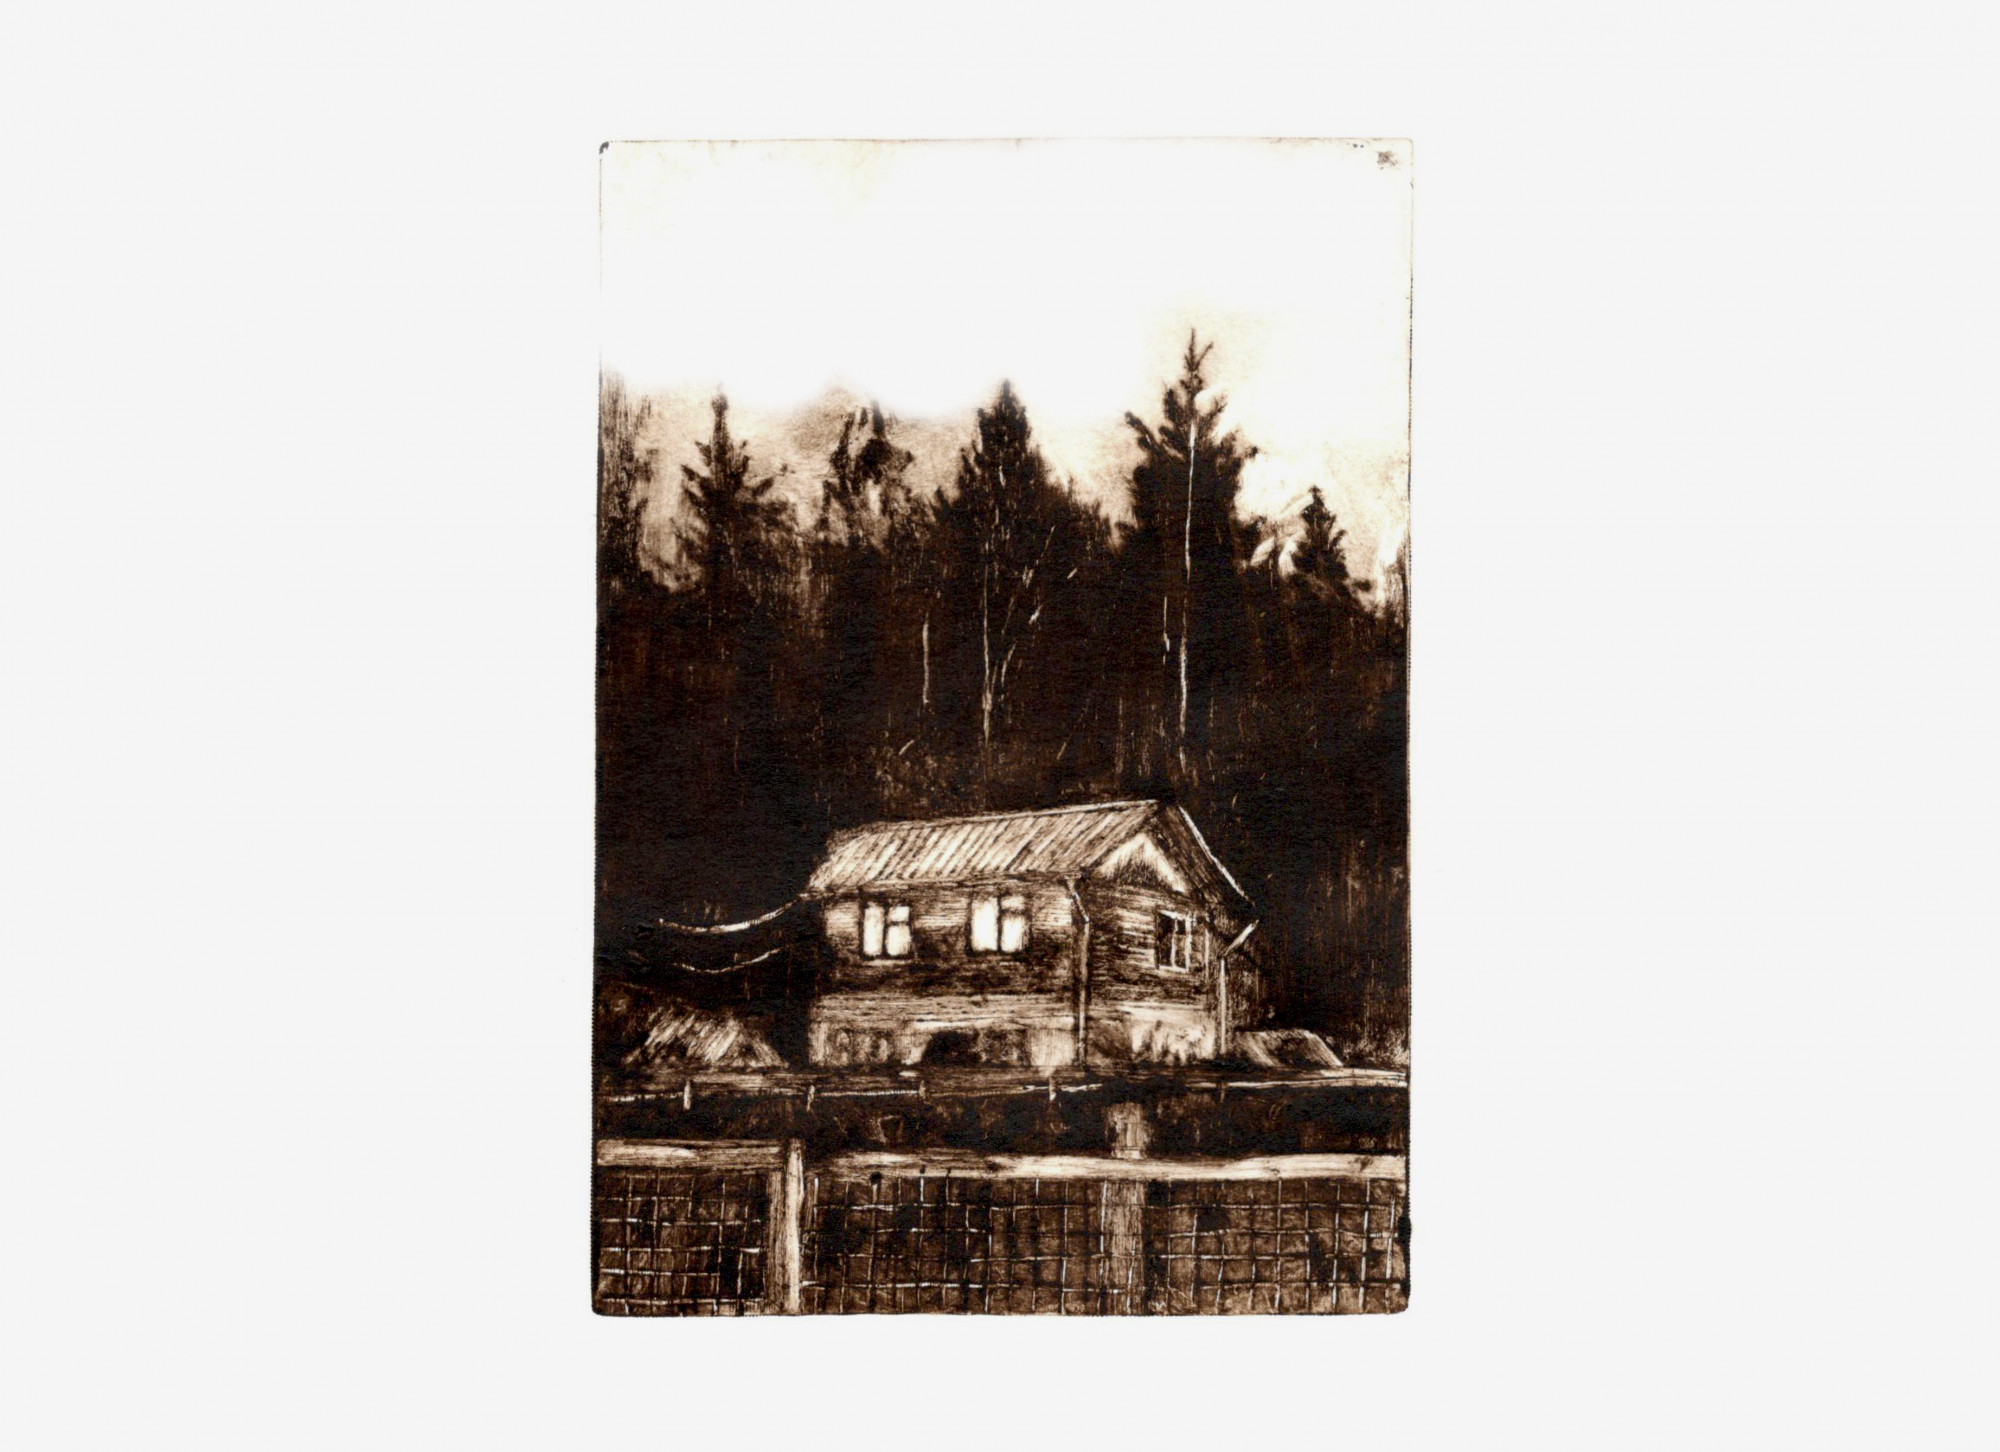 The House. From the Capture / Oblivion series, 2020. Etching on textile